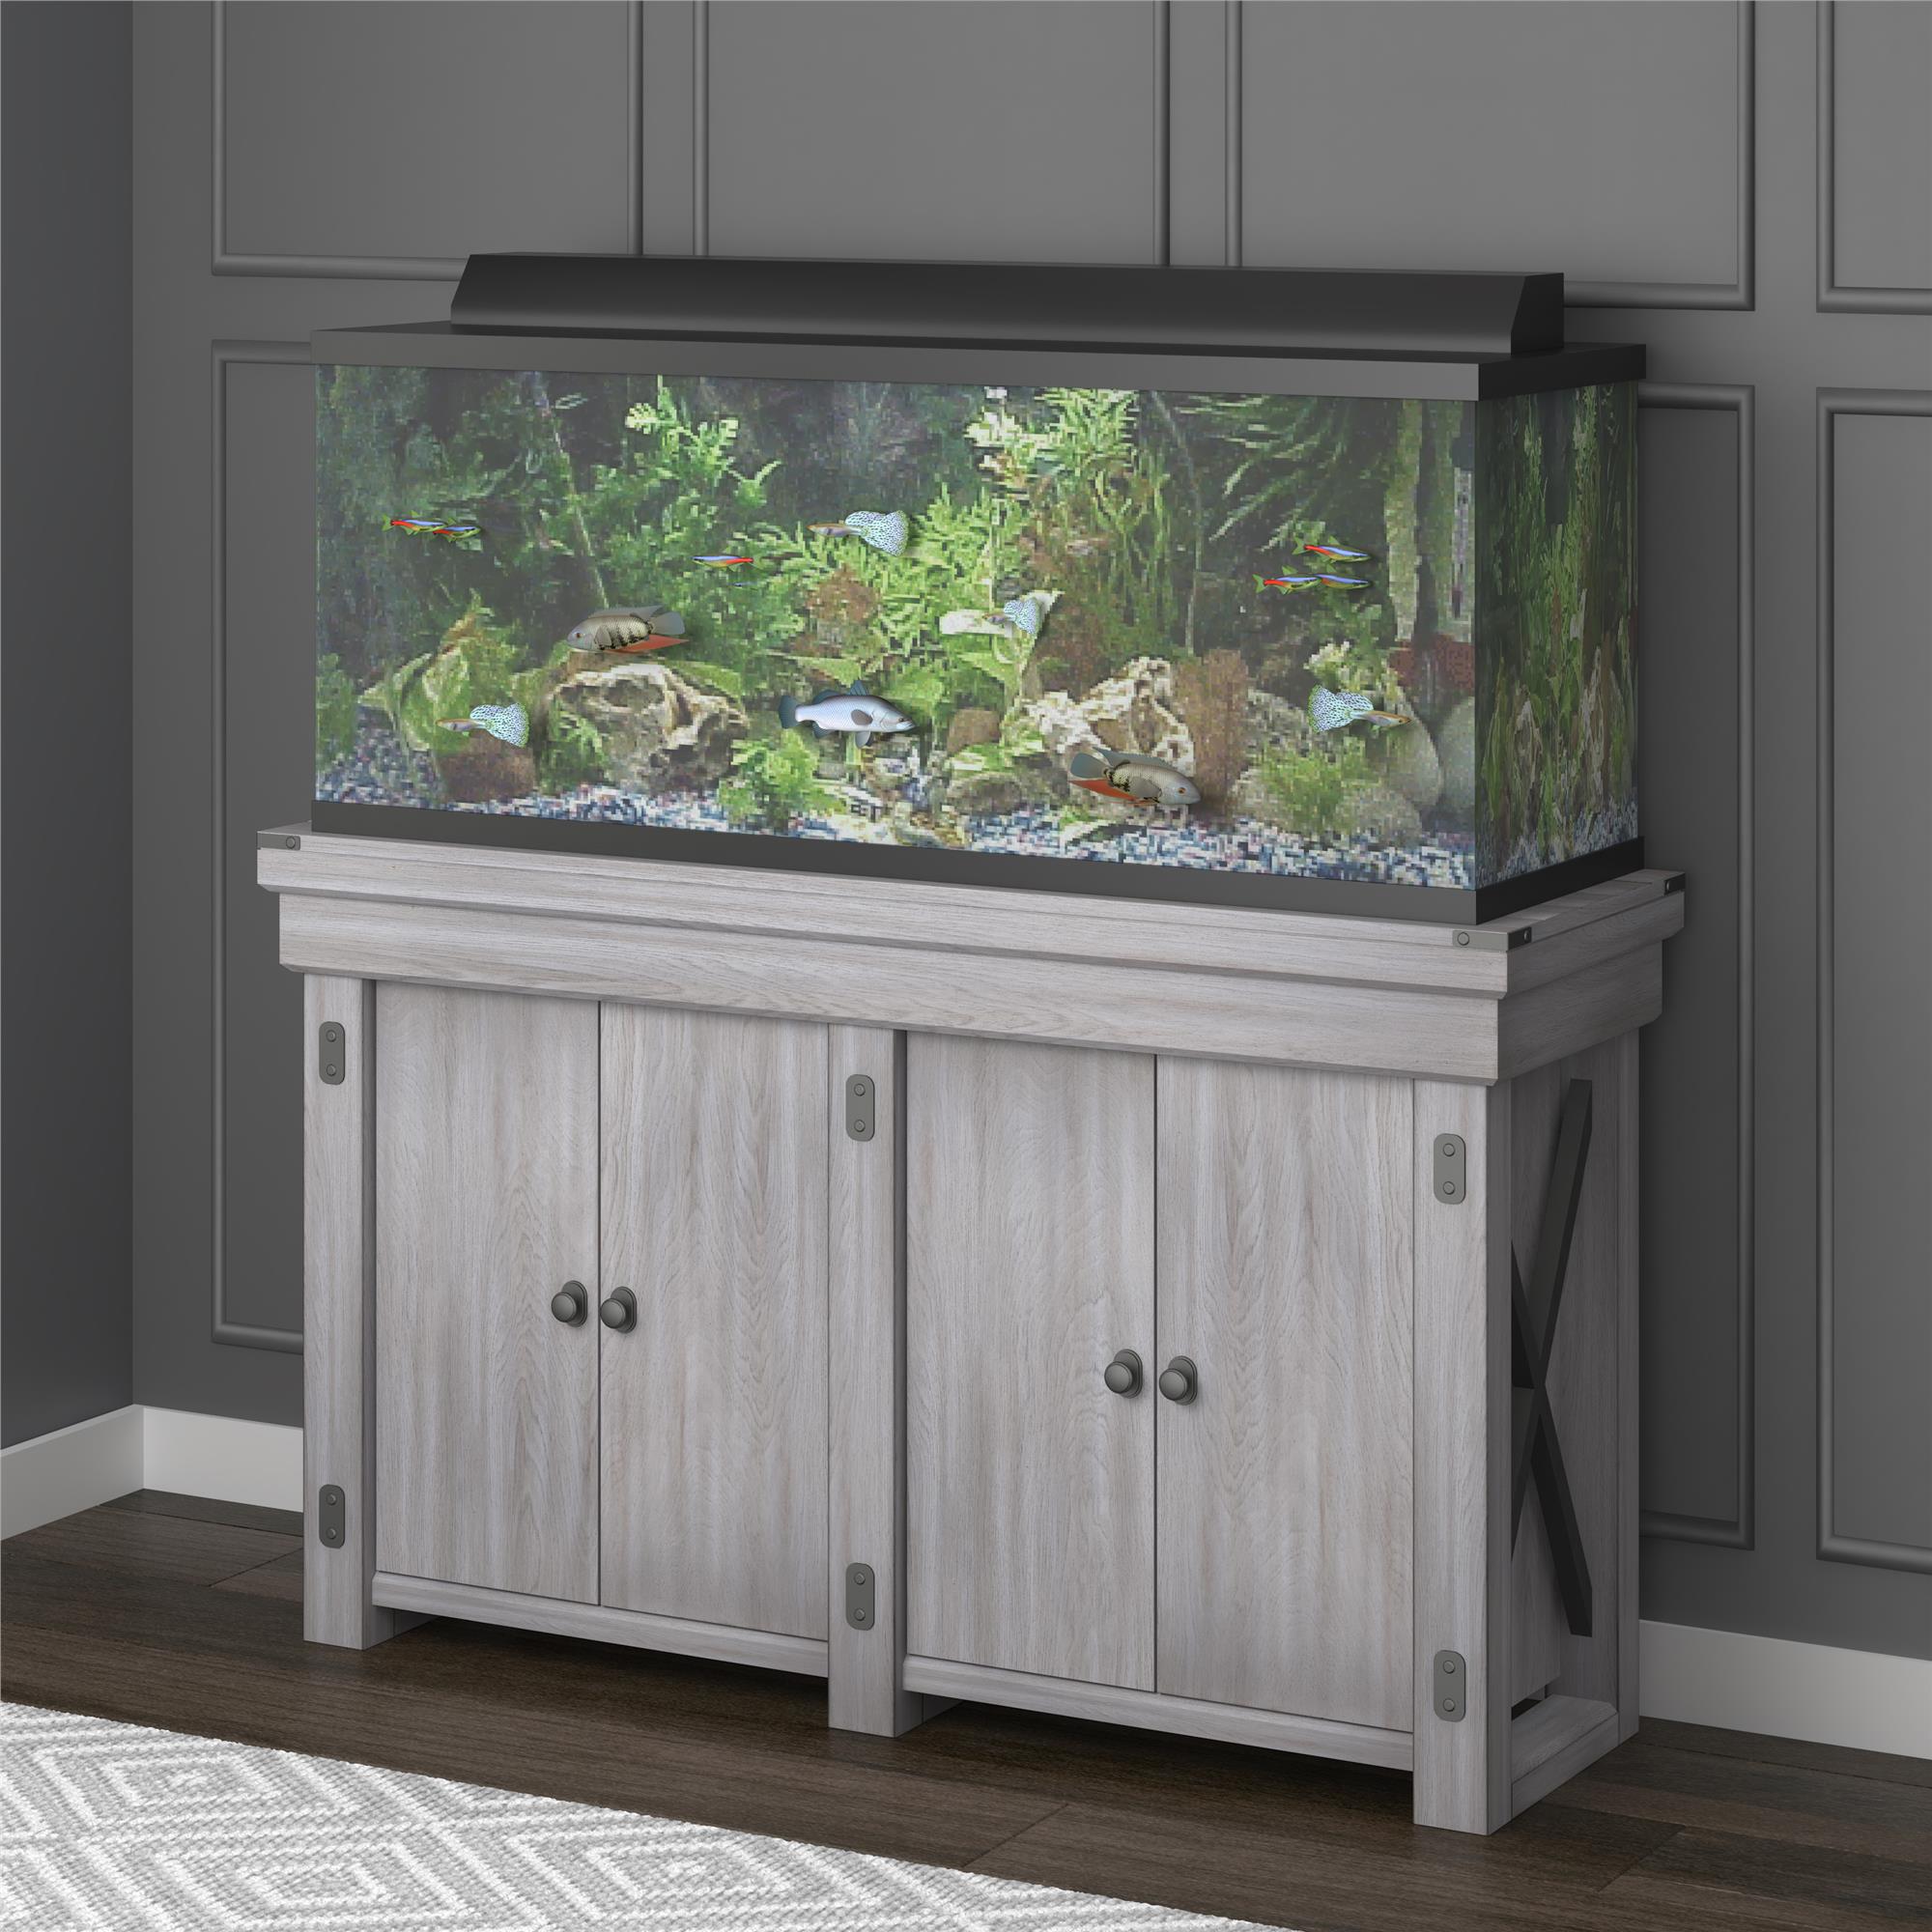 Flipper by Ollie & Hutch Wildwood 55 Gallon Aquarium Stand, Rustic White - image 3 of 14